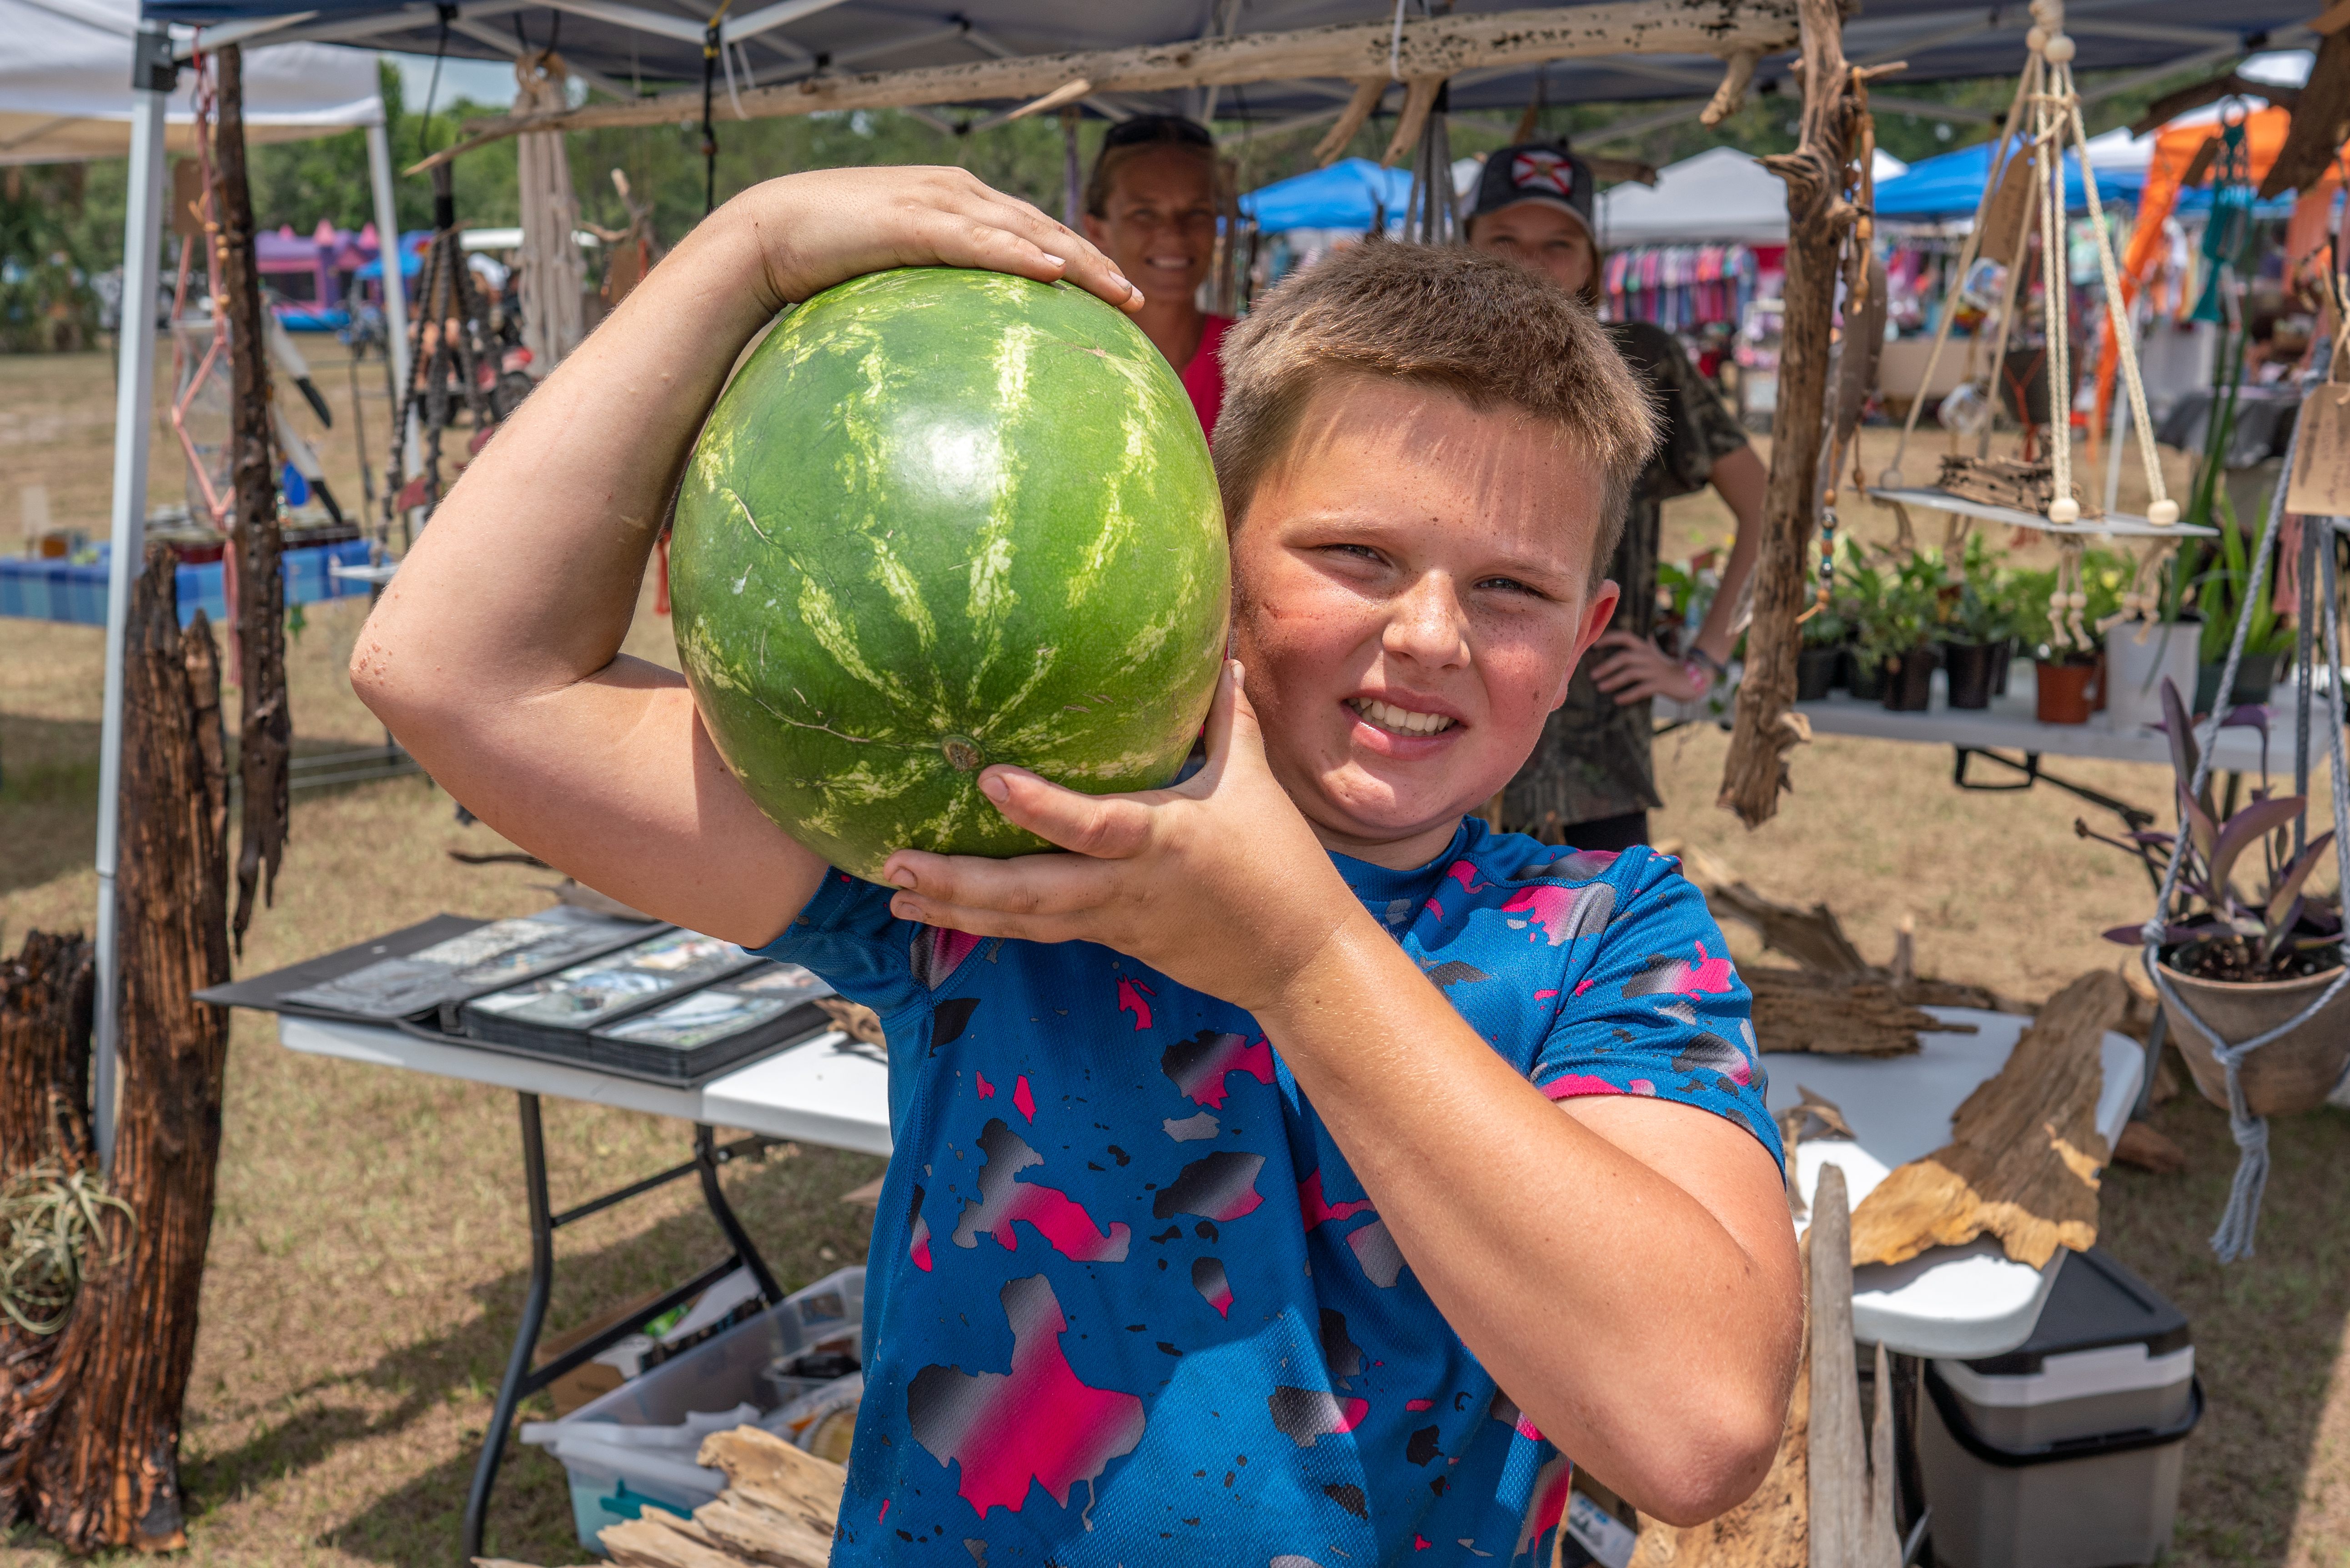 A young boy proudly displays his watermelon at the Watermelon Festival.